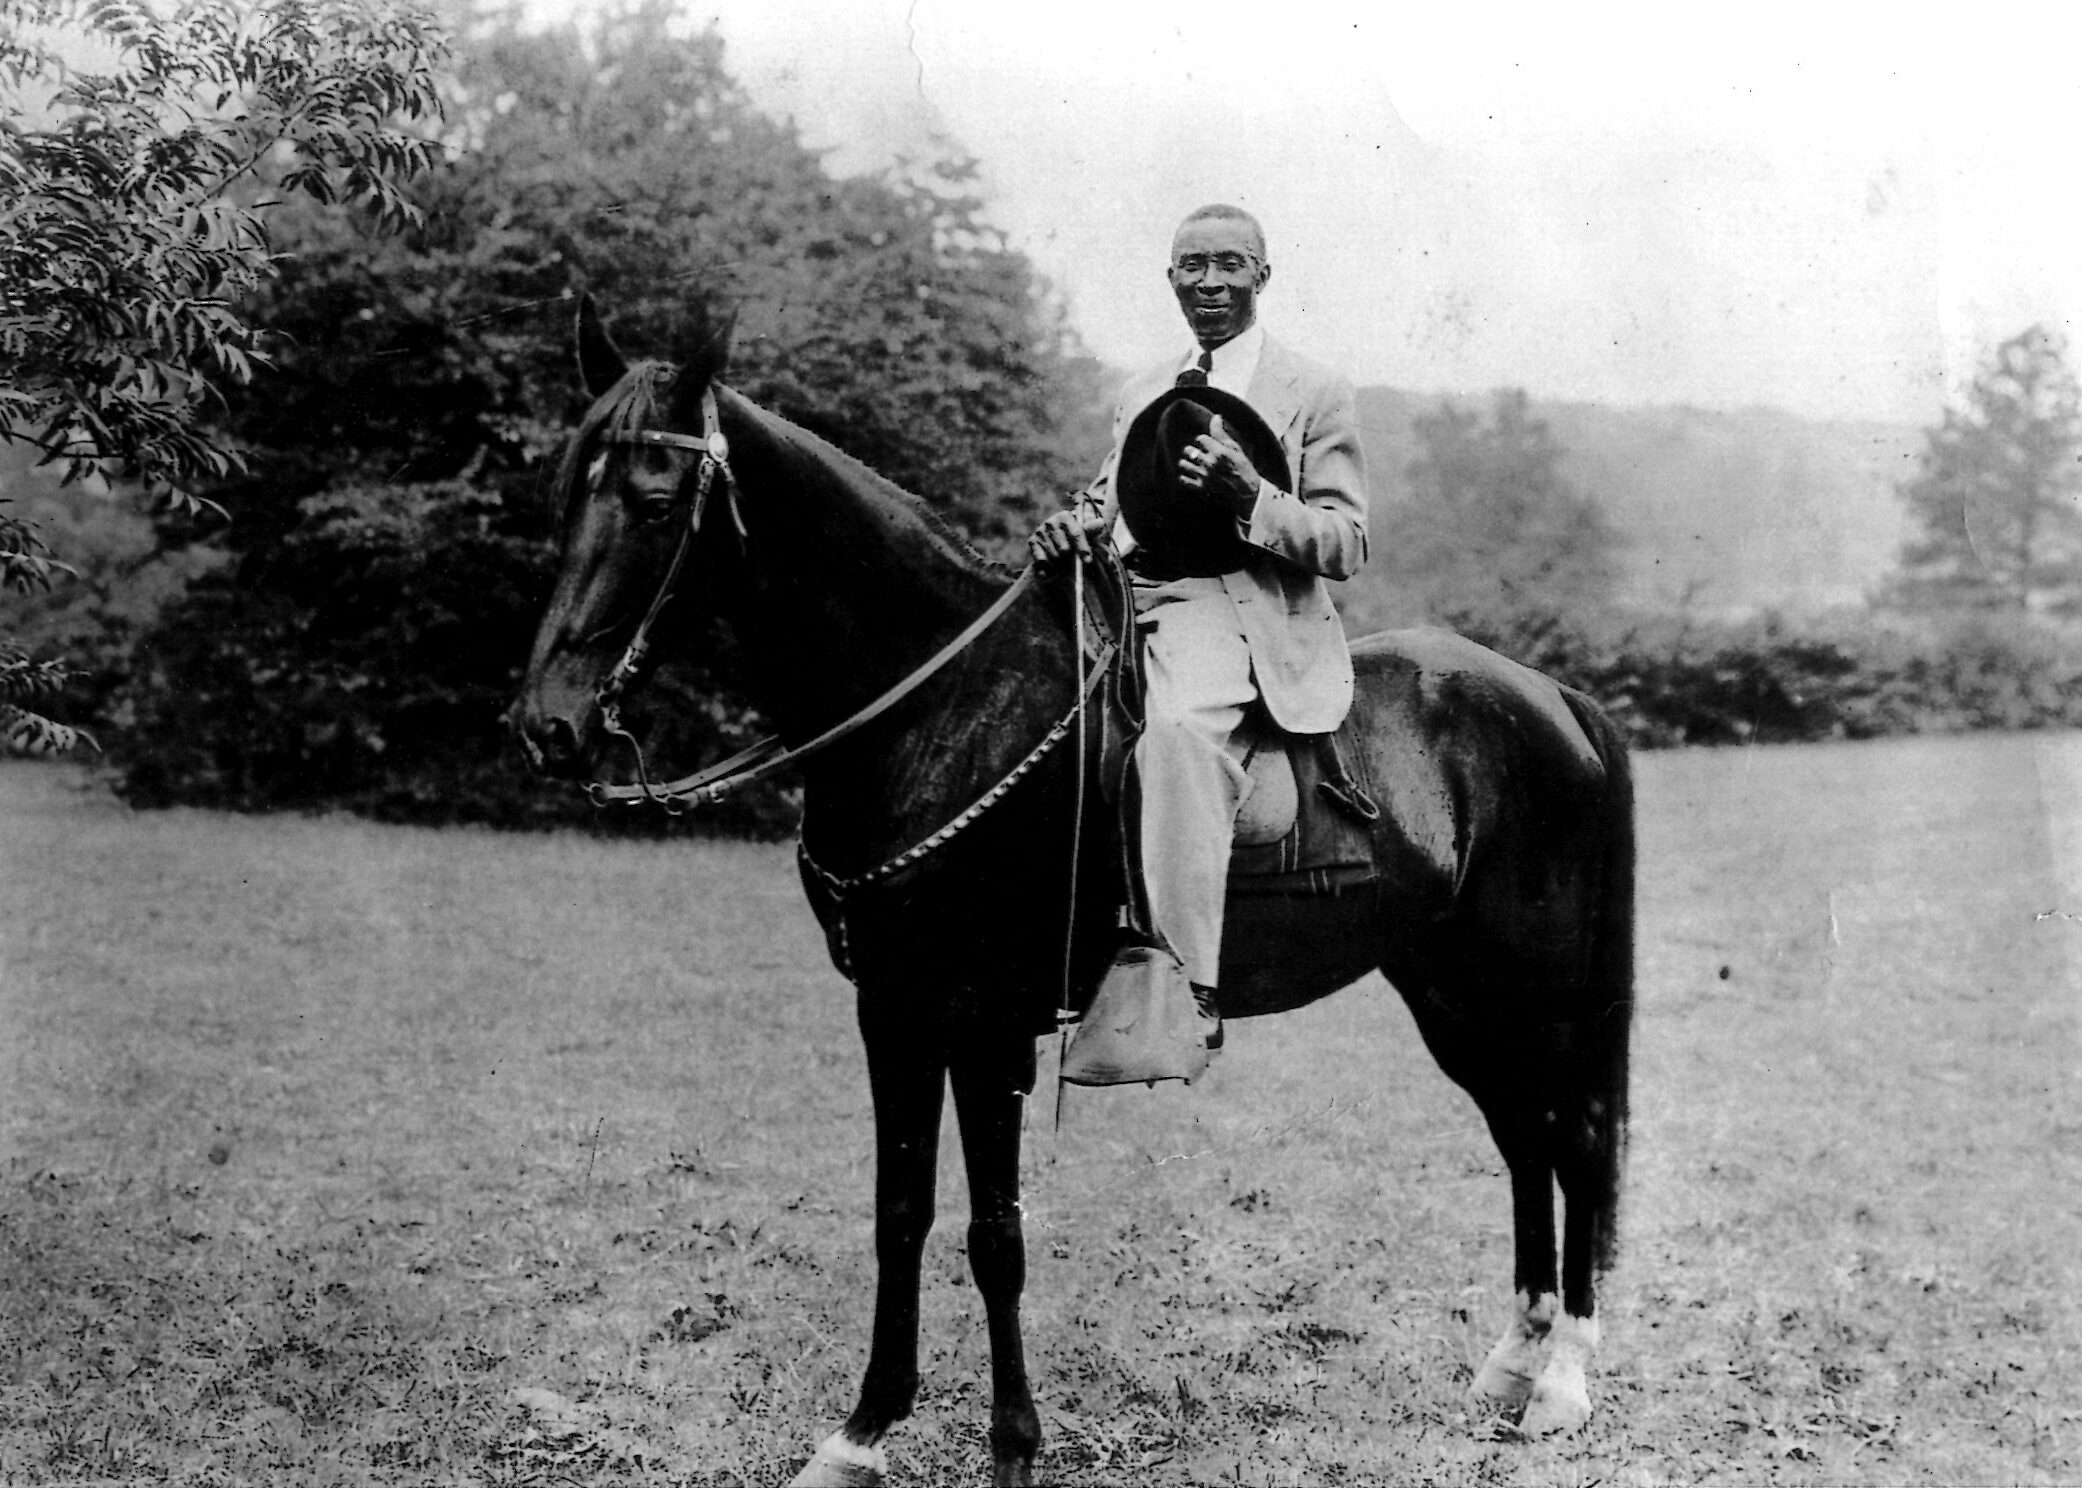 Black and white photo of a man sitting on a horse